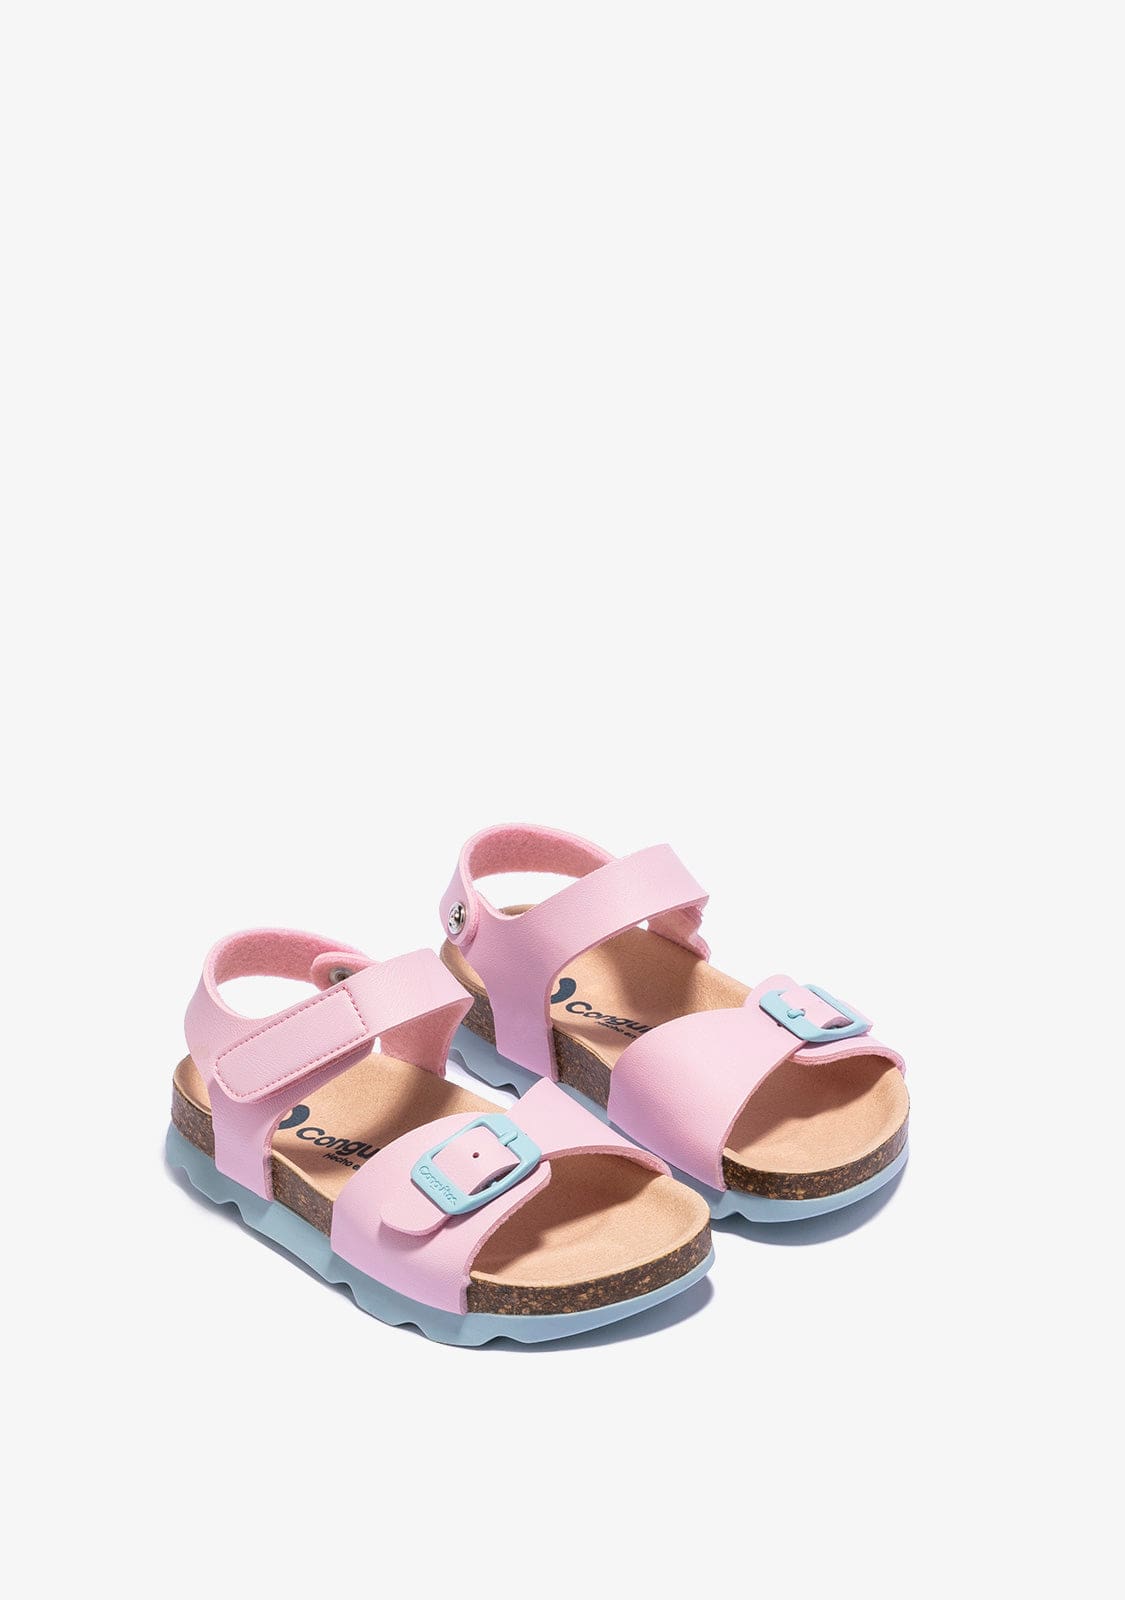 CONGUITOS Shoes Girl's Pink Bio Sandals